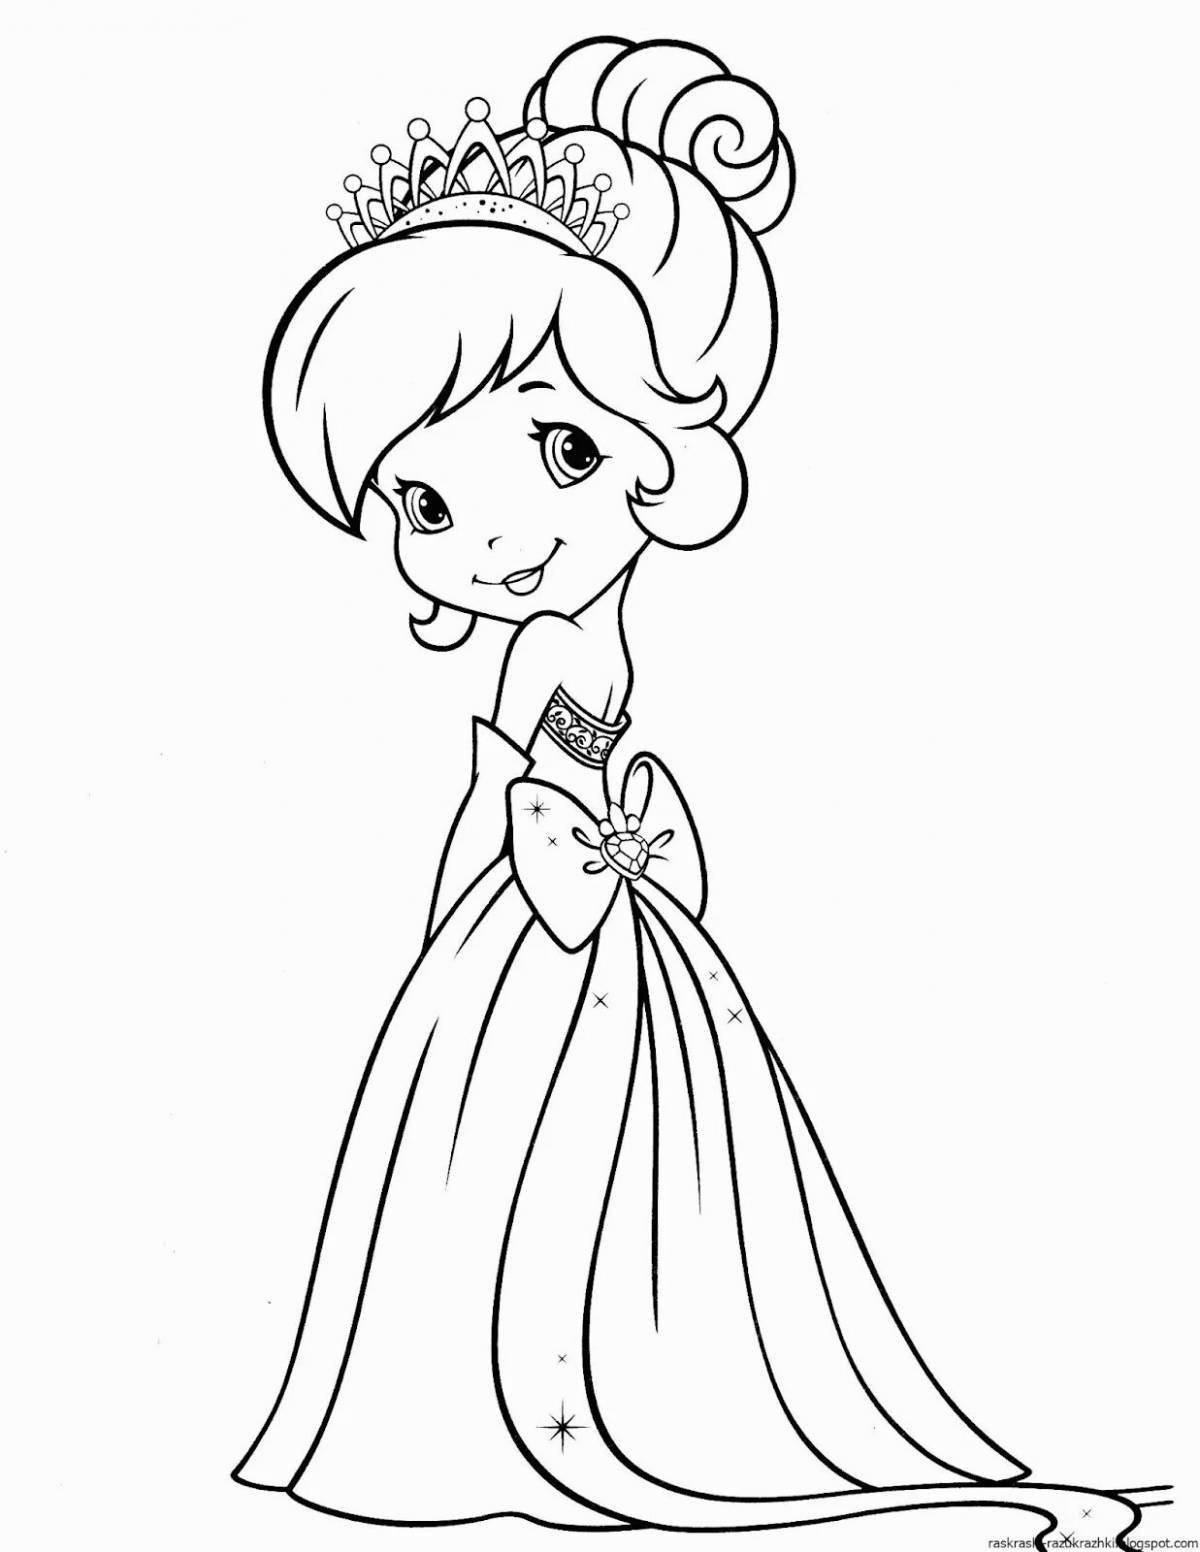 Festive coloring book for girls princesses 5-6 years old